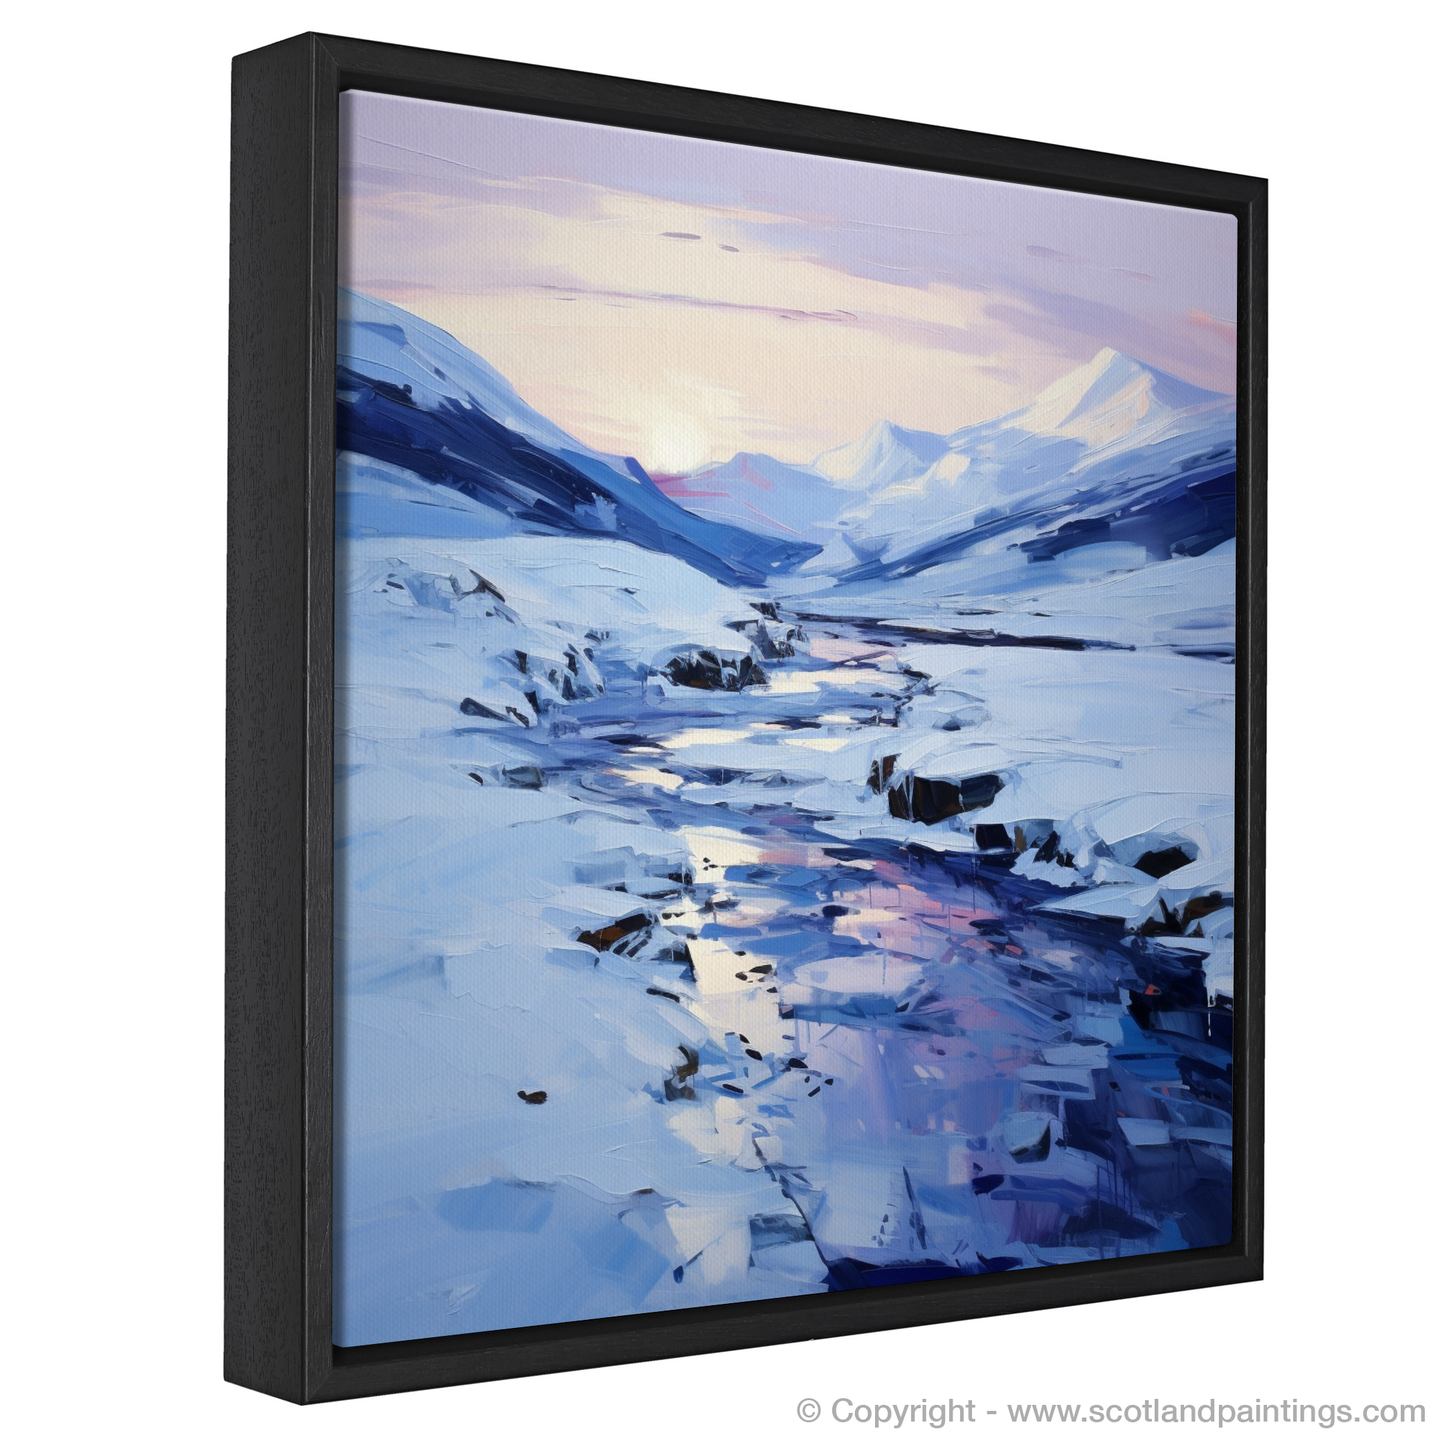 Painting and Art Print of Pristine snow at dusk in Glencoe entitled "Twilight Serenade in Glencoe Snow".